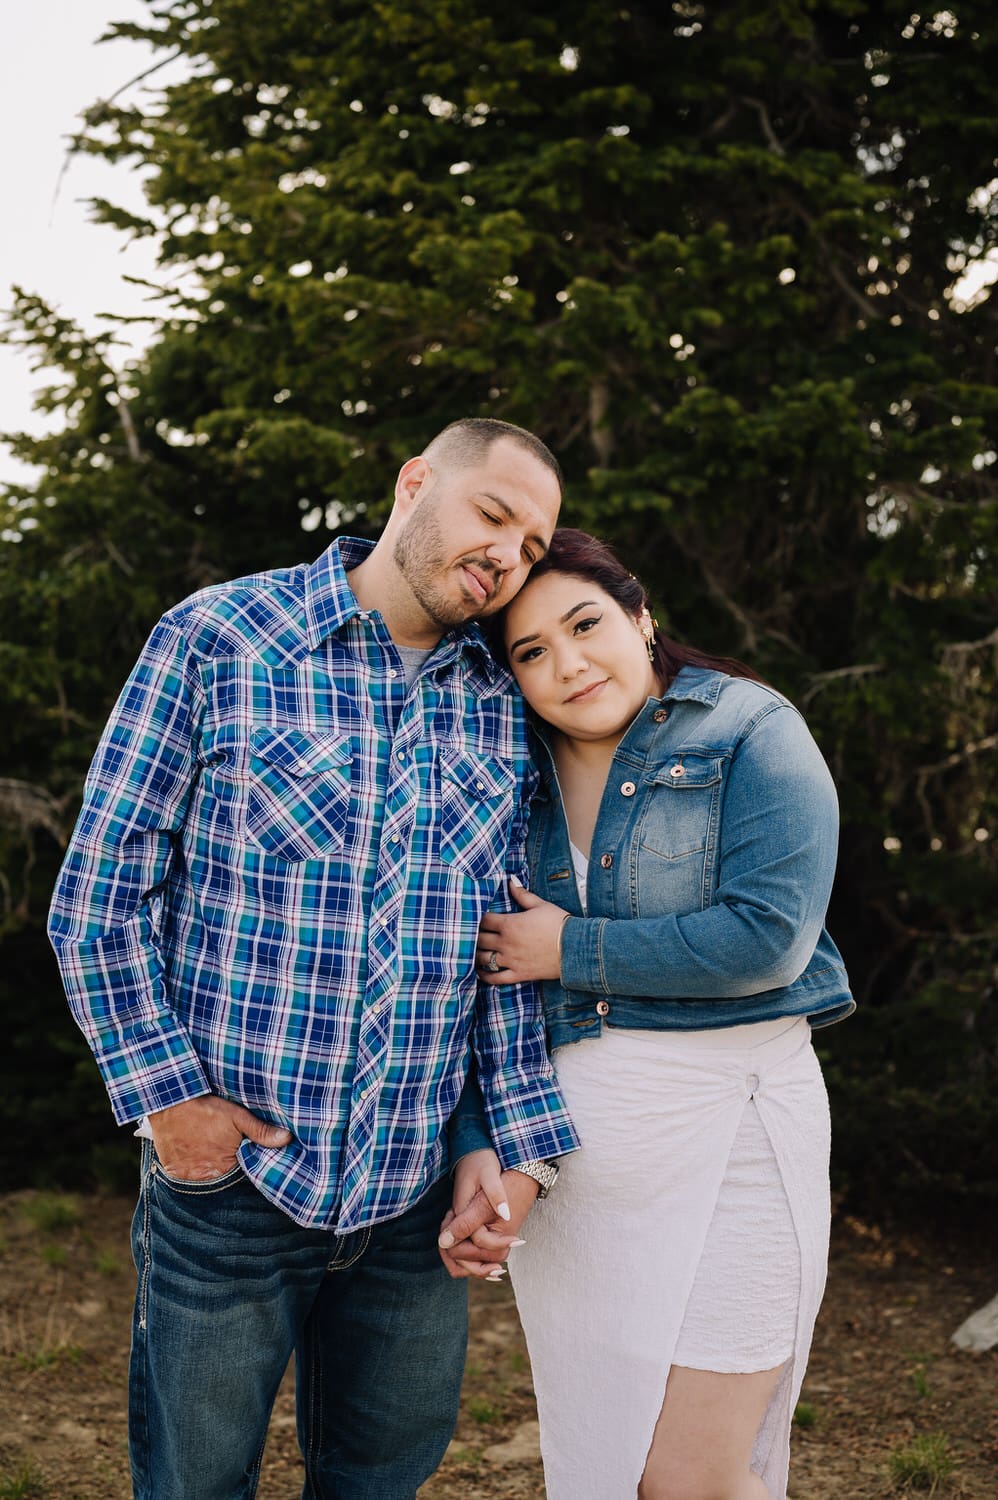 A woman leans on her partner and makes eye contact with the camera. The couple is wearing blue toned clothing for their engagement session in cascade, Idaho.